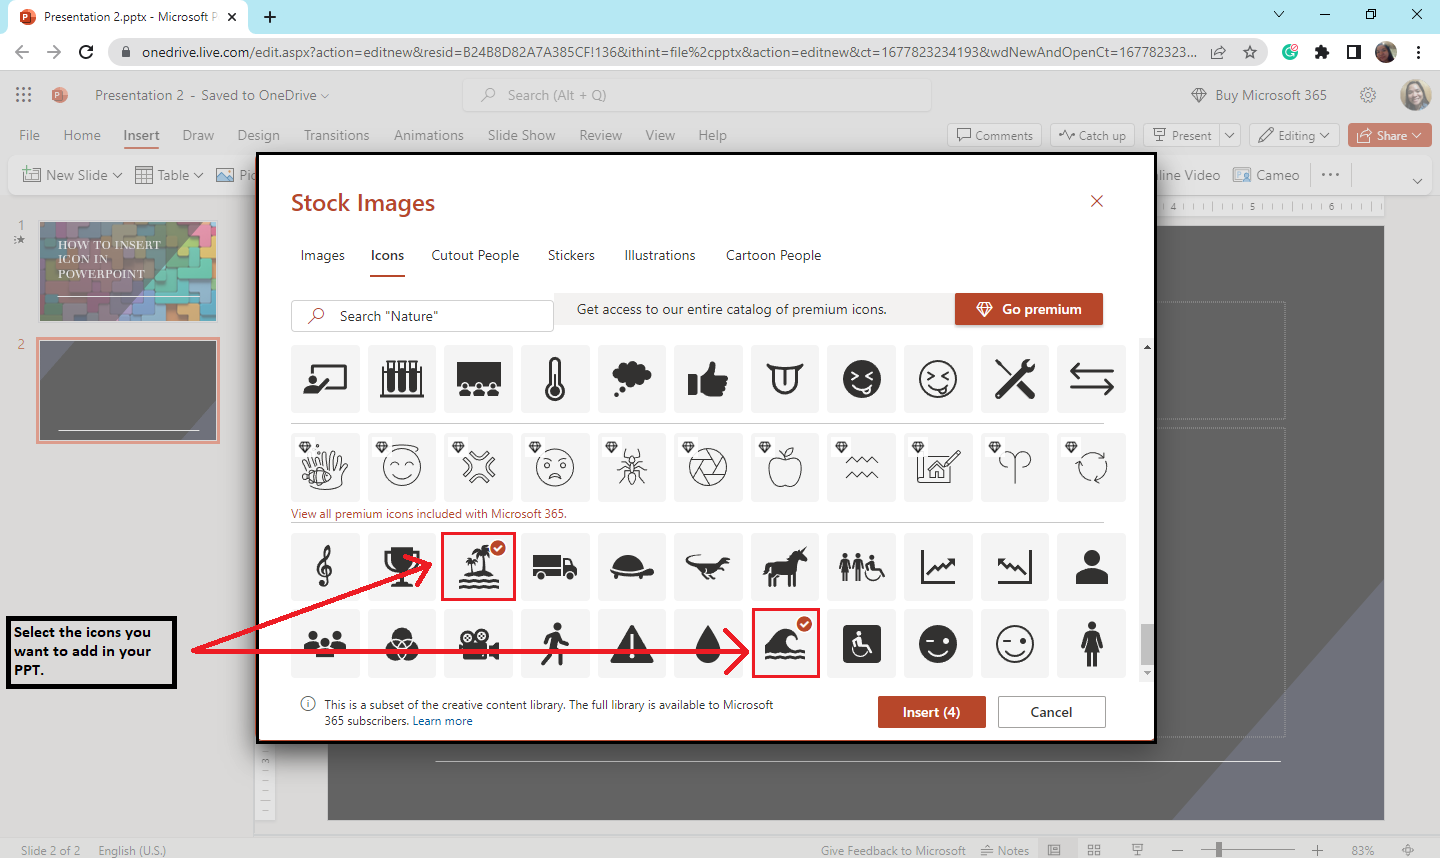 After the dialog box for "Stock Images" will appear. Select an icon from the PowerPoint icon library.